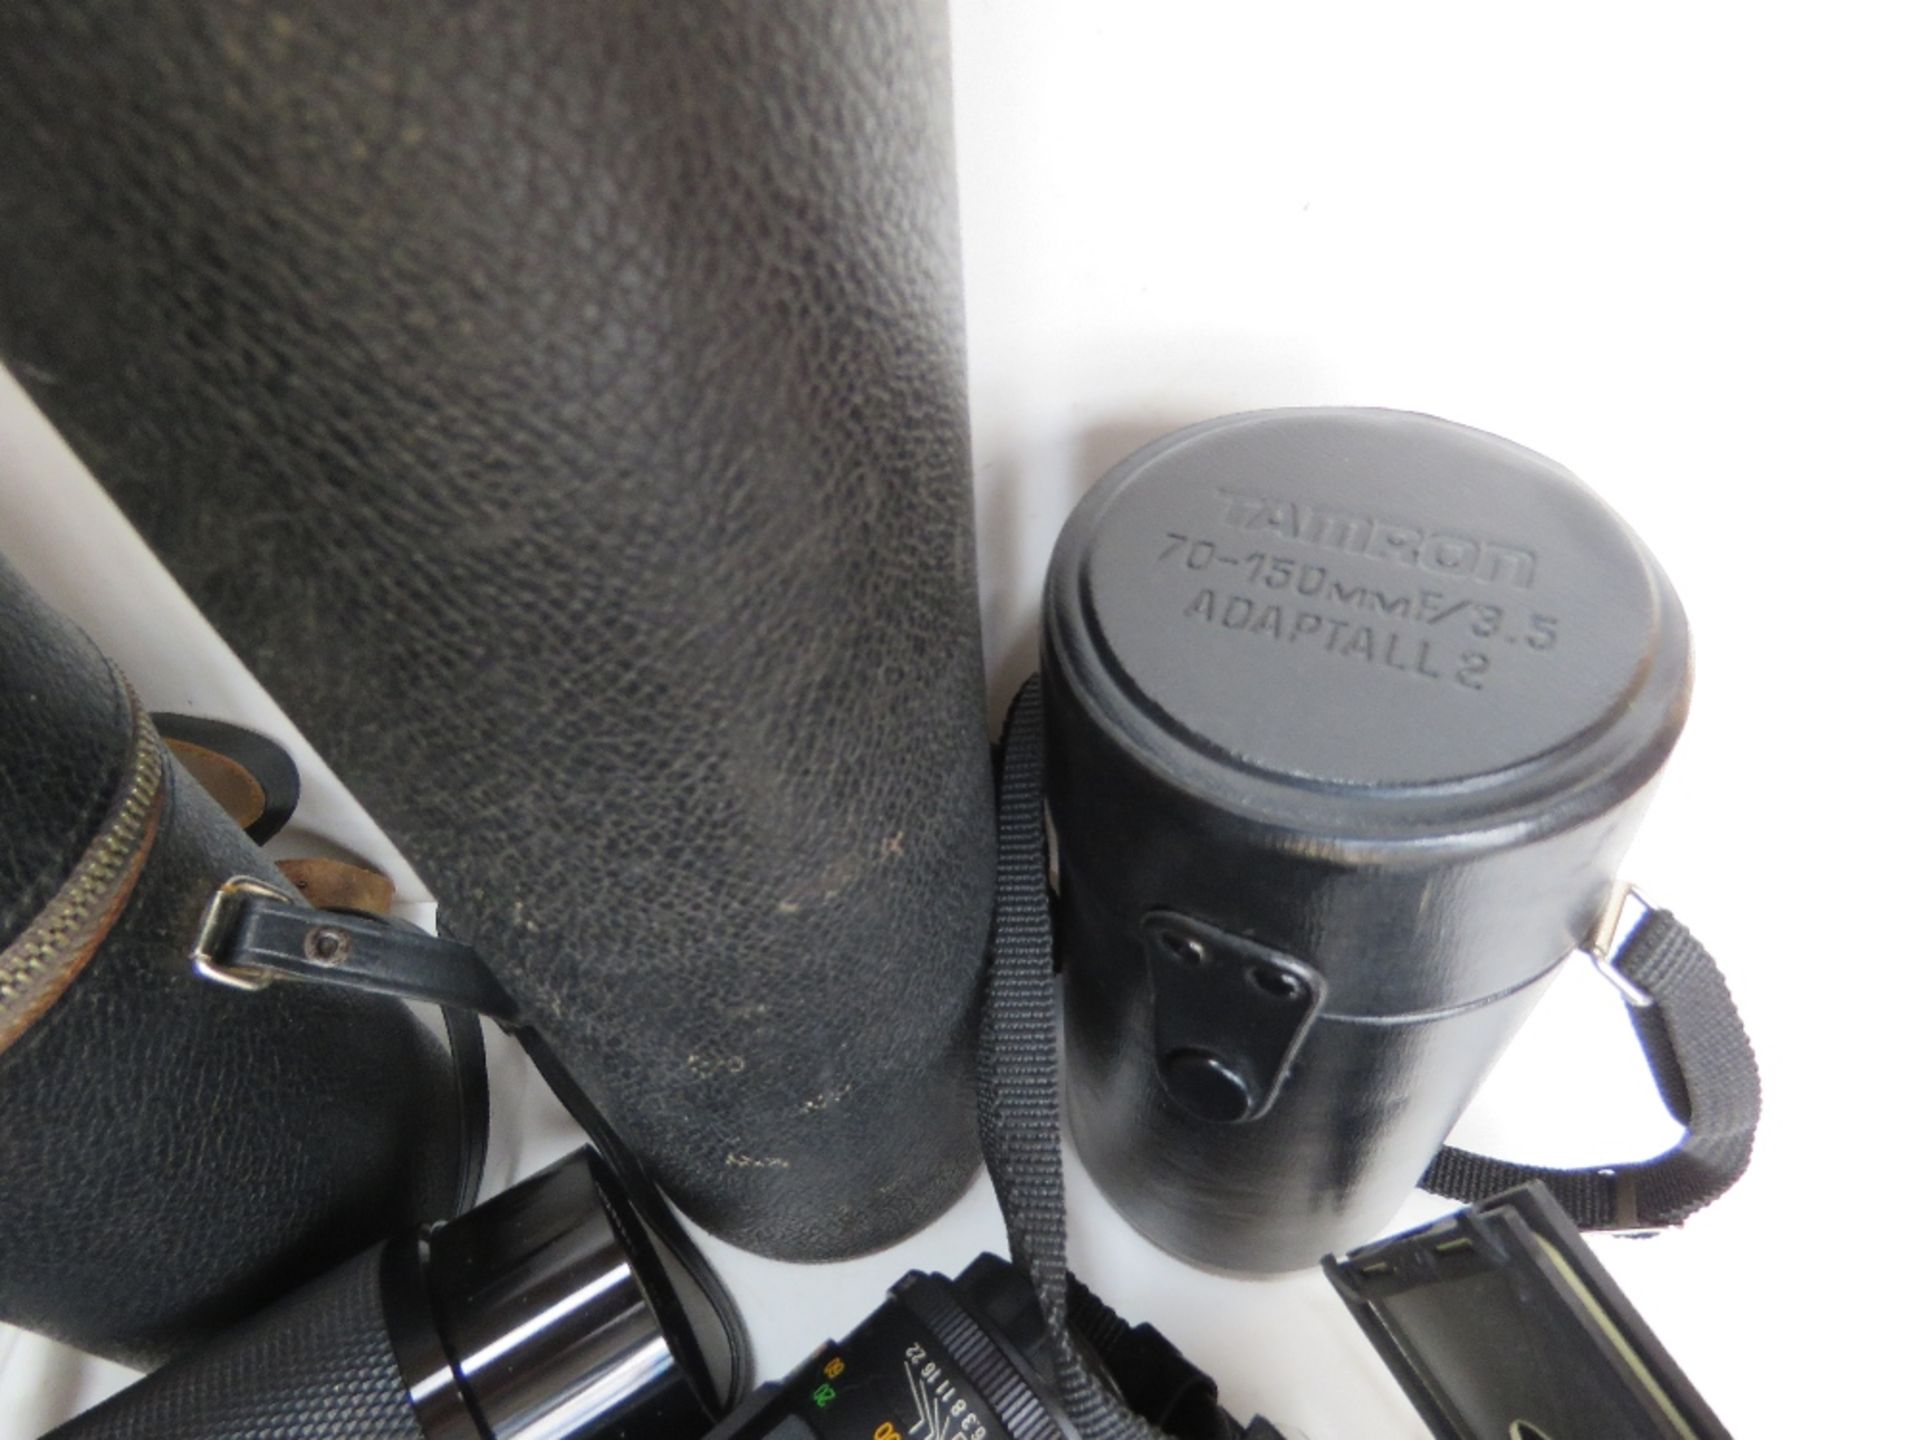 A quantity of photographic equipment inc lenses and tripod, Tamron lenses noted. - Image 7 of 7